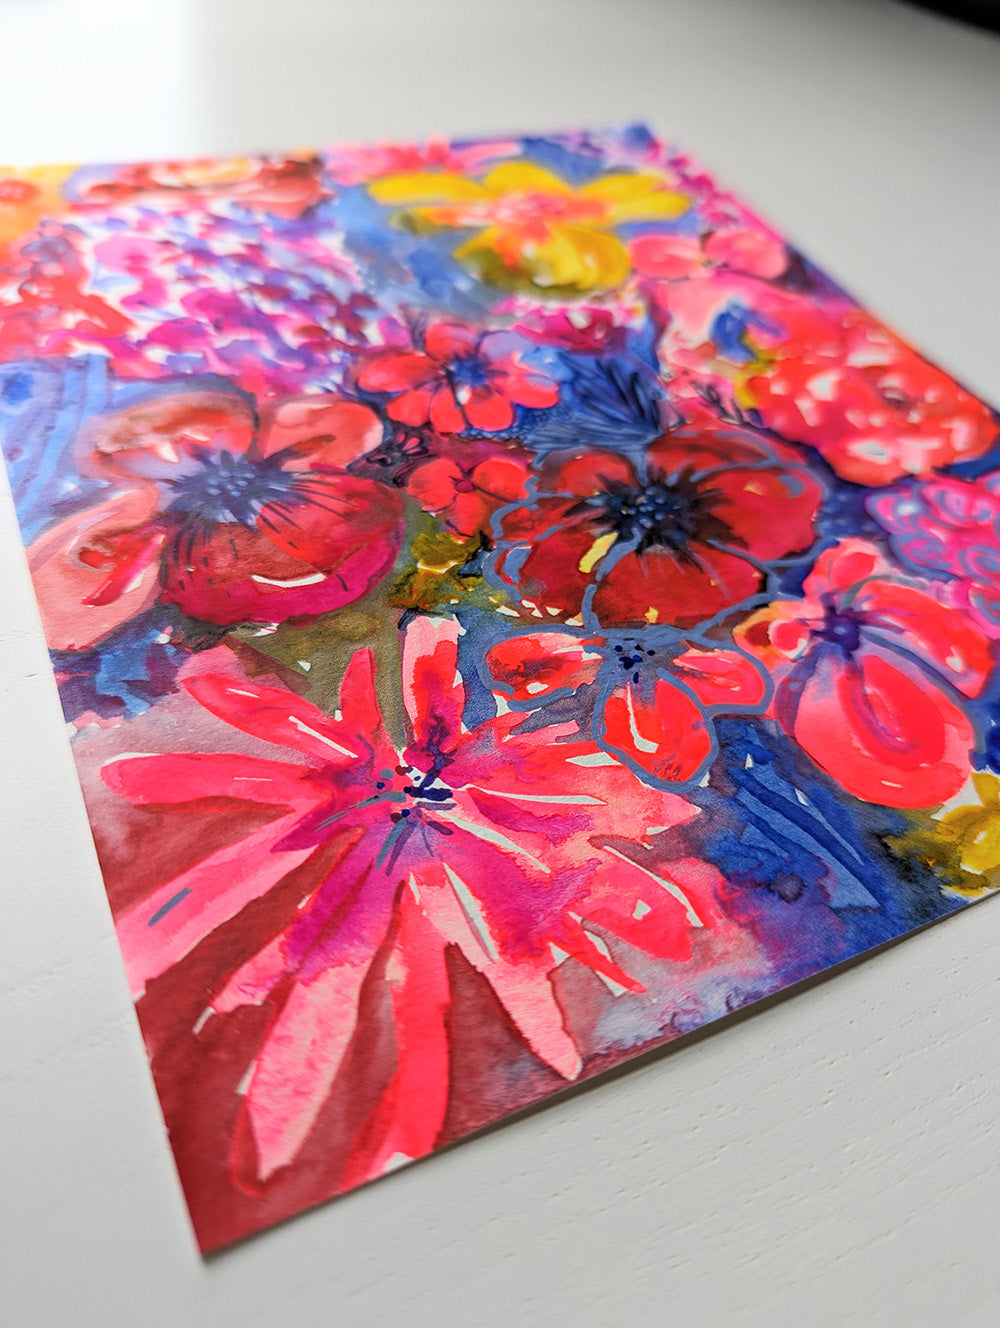 Neon Floral #4 - Original Painting by Briana Feola